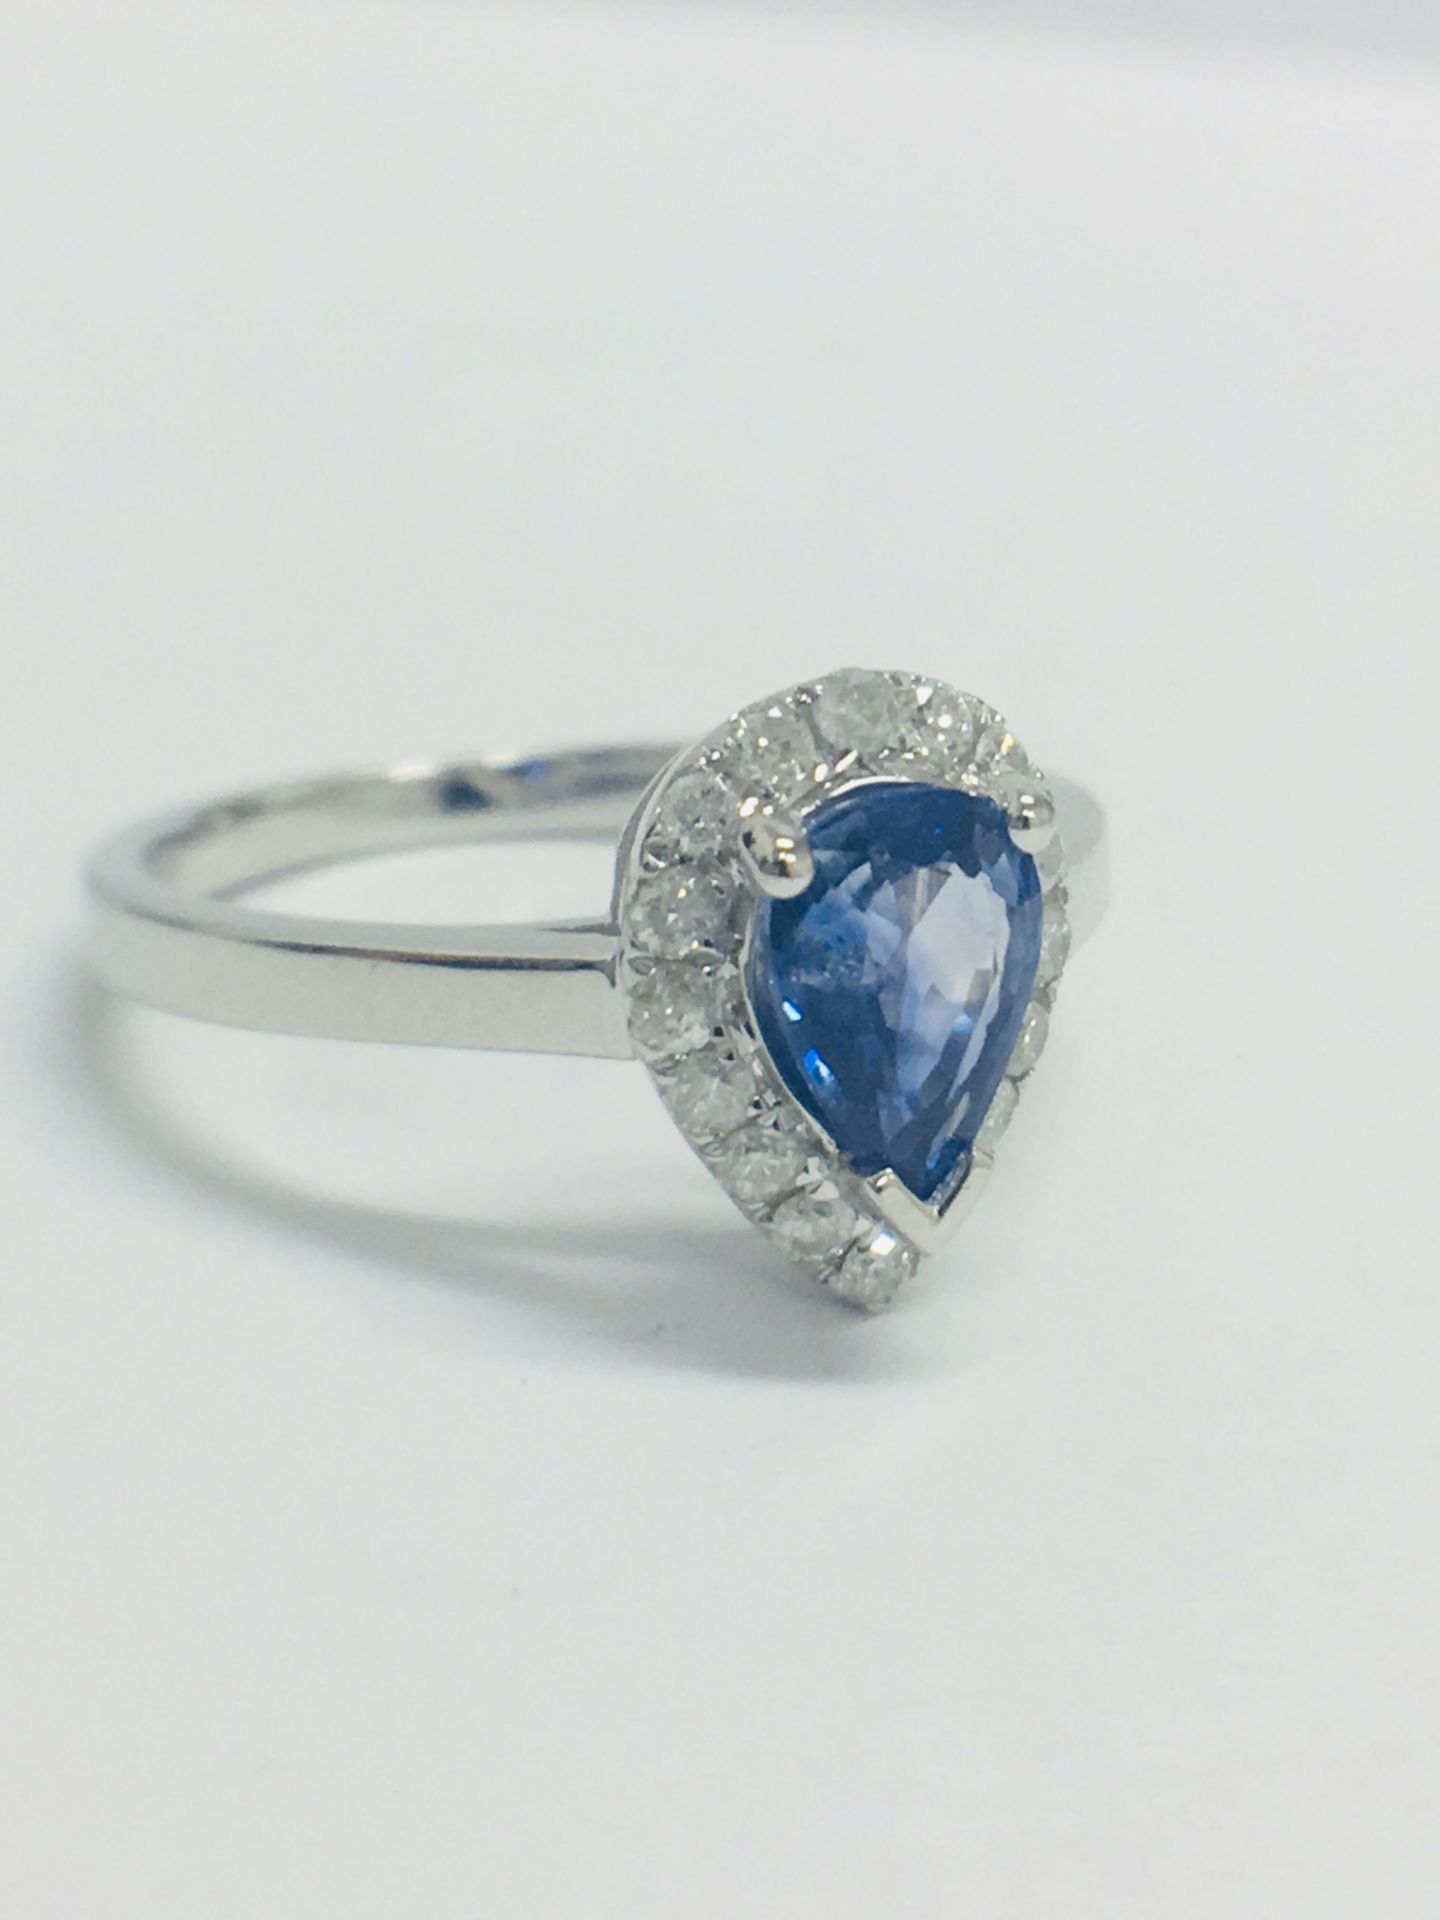 14Ct White Gold Sapphire And Diamond Ring - Image 7 of 10